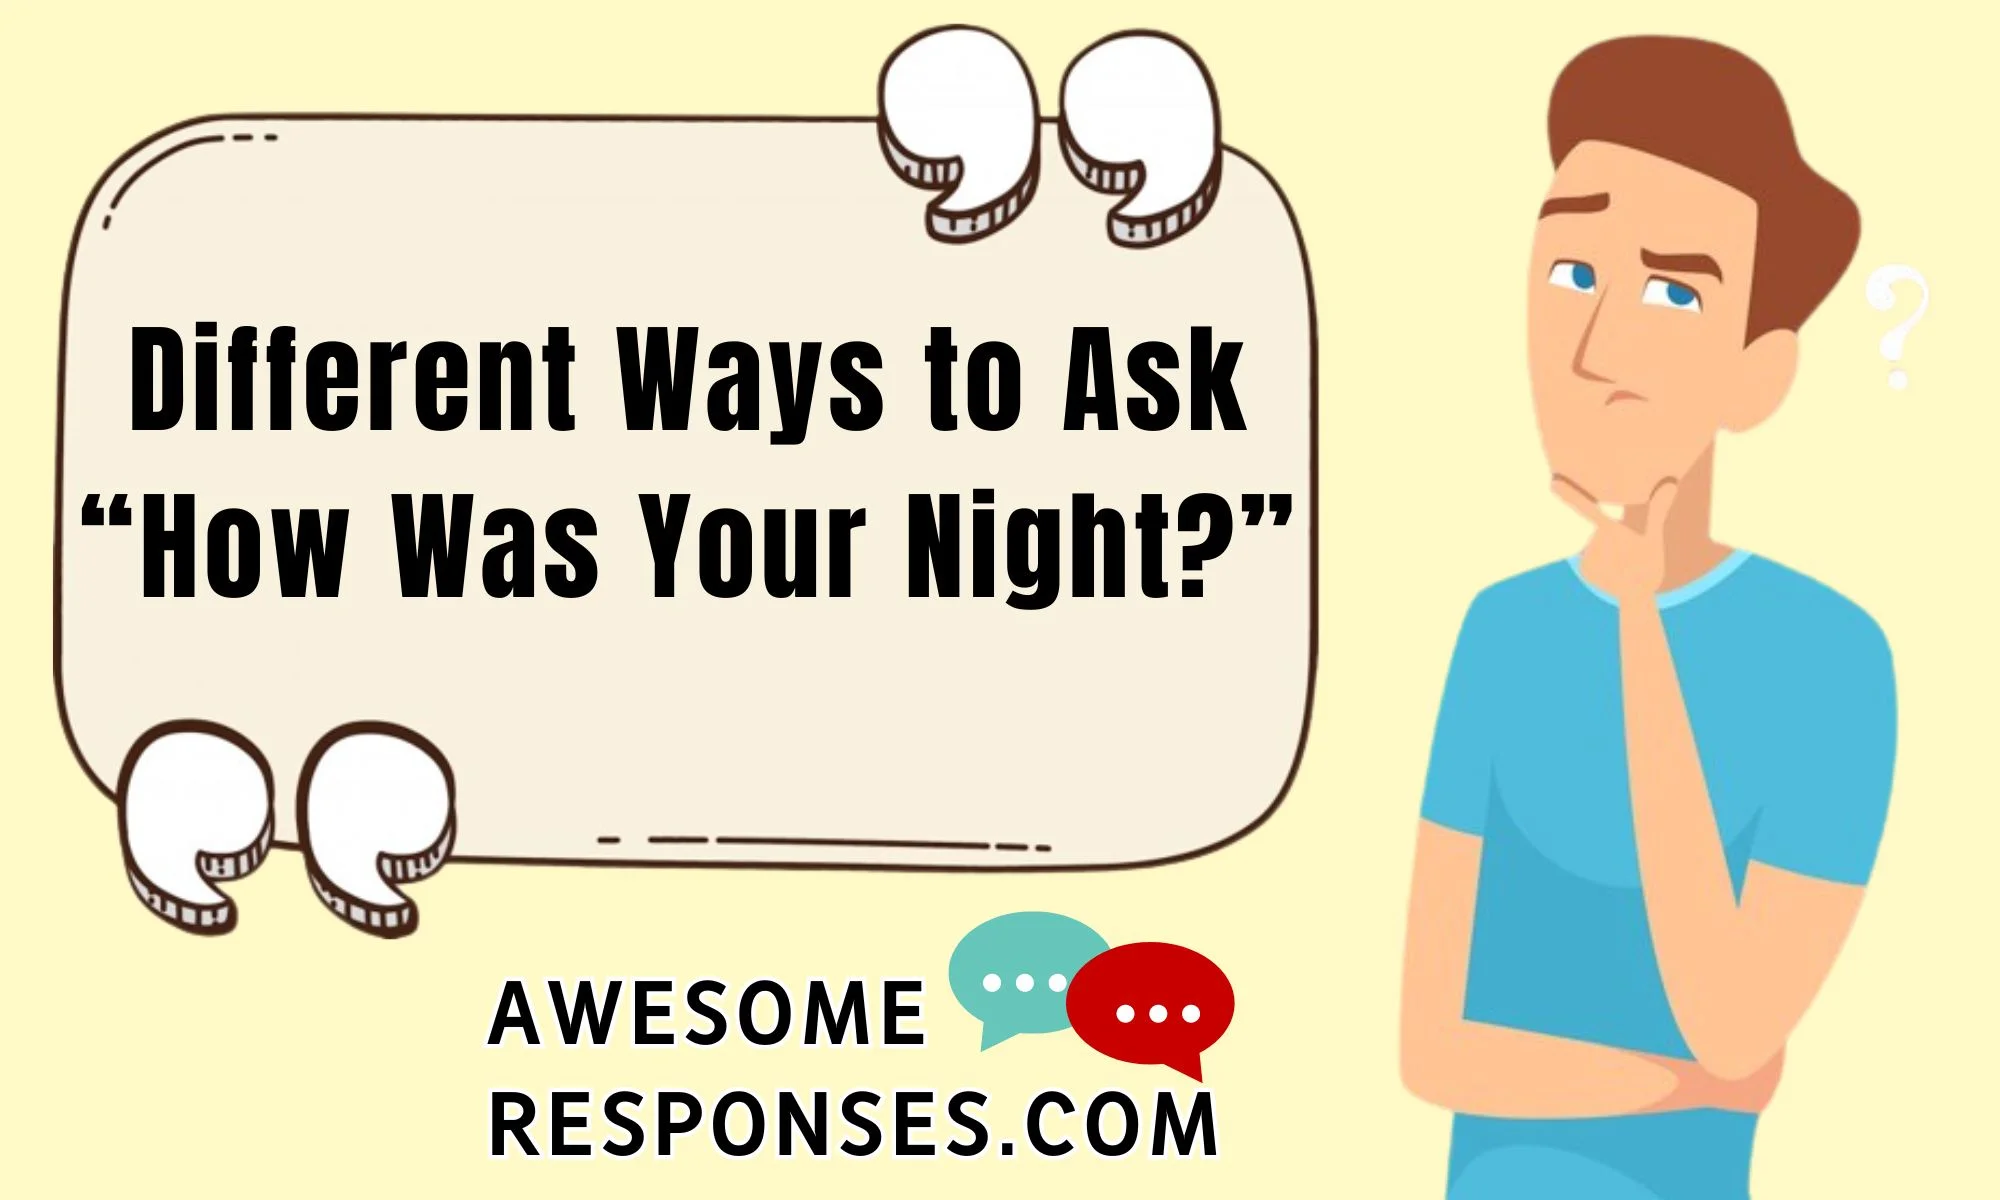 Different Ways to Ask “How Was Your Night?”